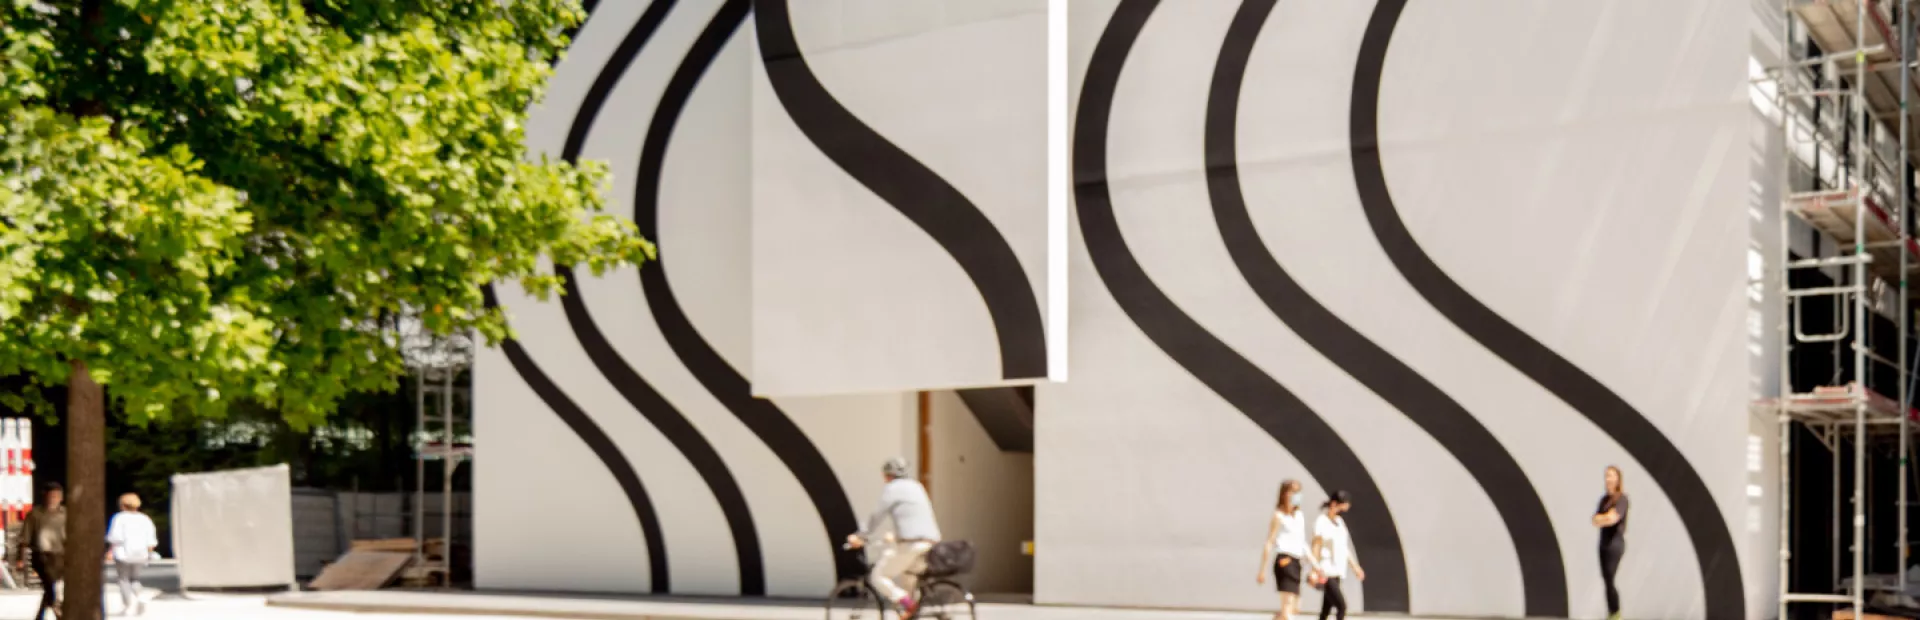 A large, 60 meter-tall wall mural with curved black lines on a white background